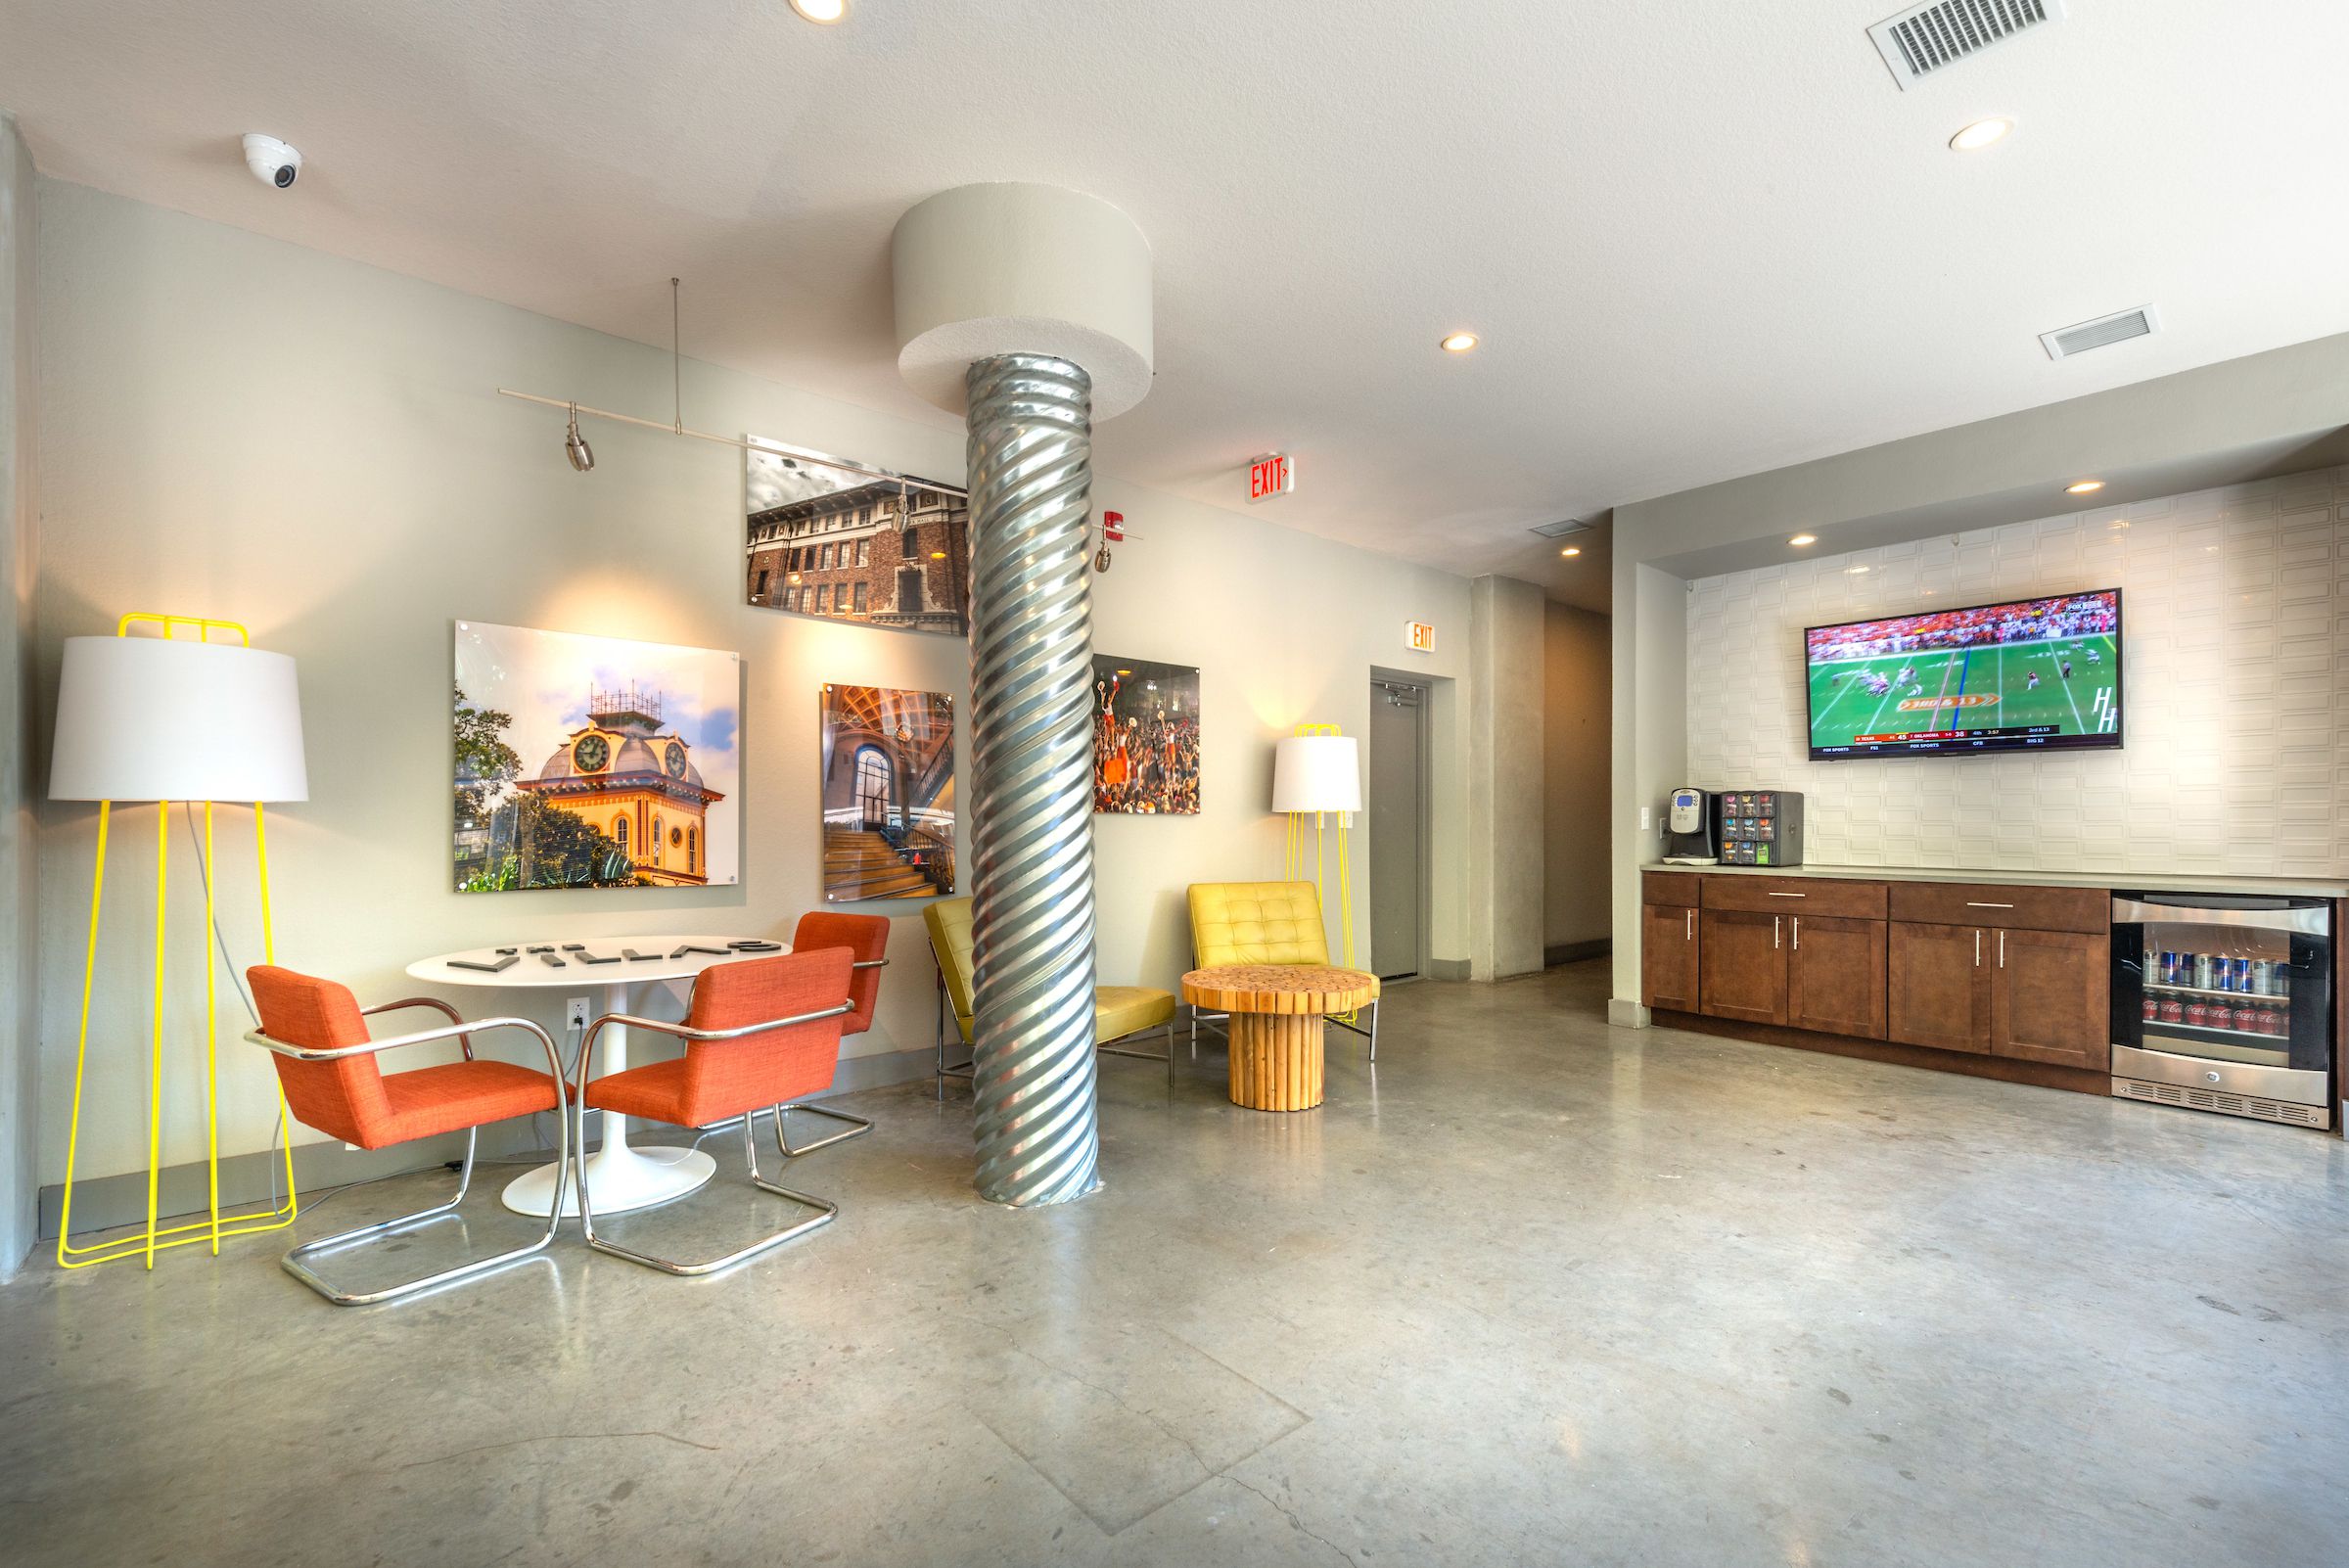 Villas on 26th leasing lobby with modern chairs, desks, and modern artwork on walls, TV screen, coffee machine, and beverage fridge